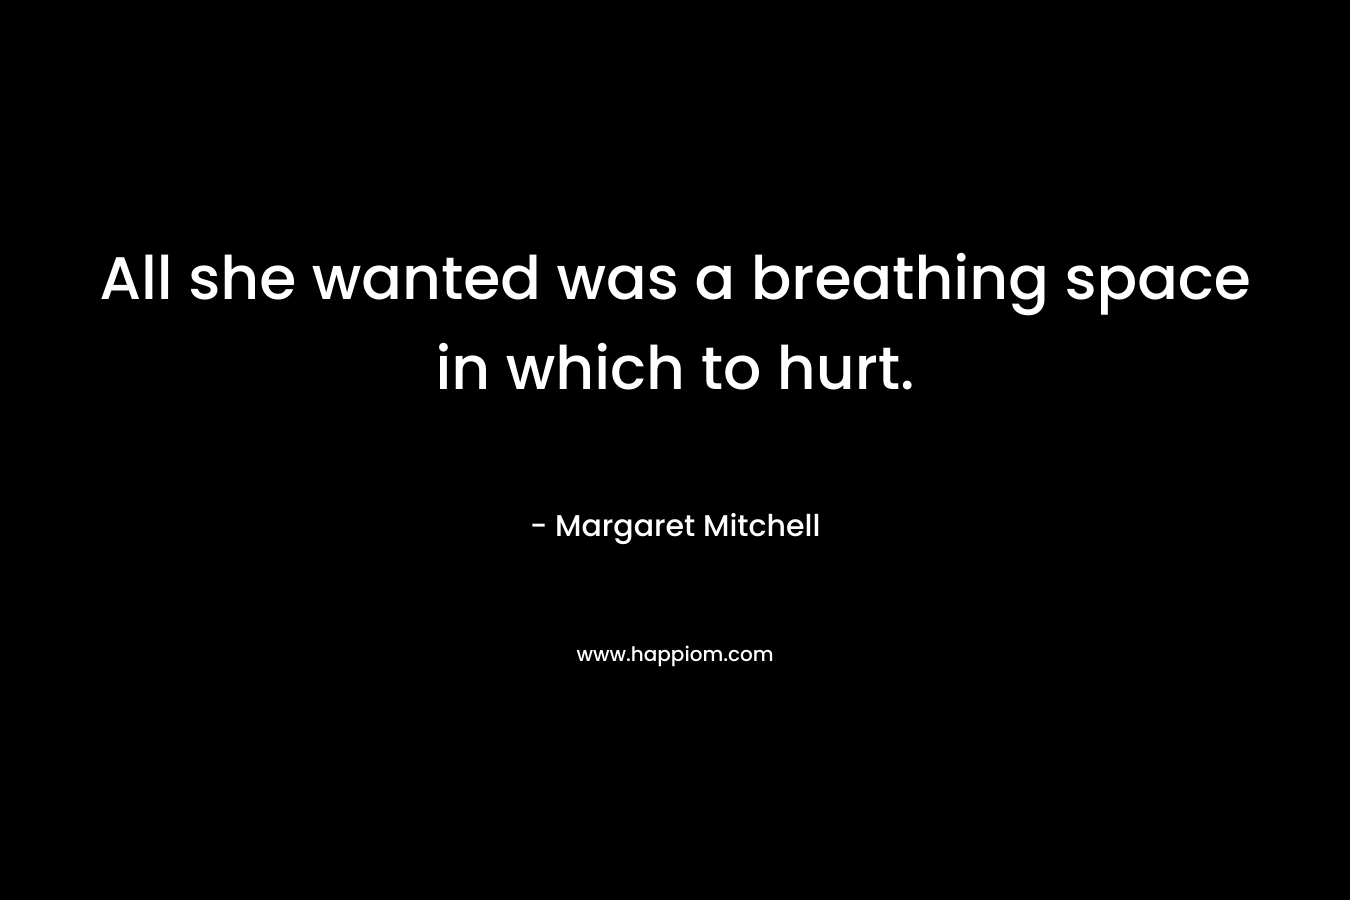 All she wanted was a breathing space in which to hurt. – Margaret Mitchell